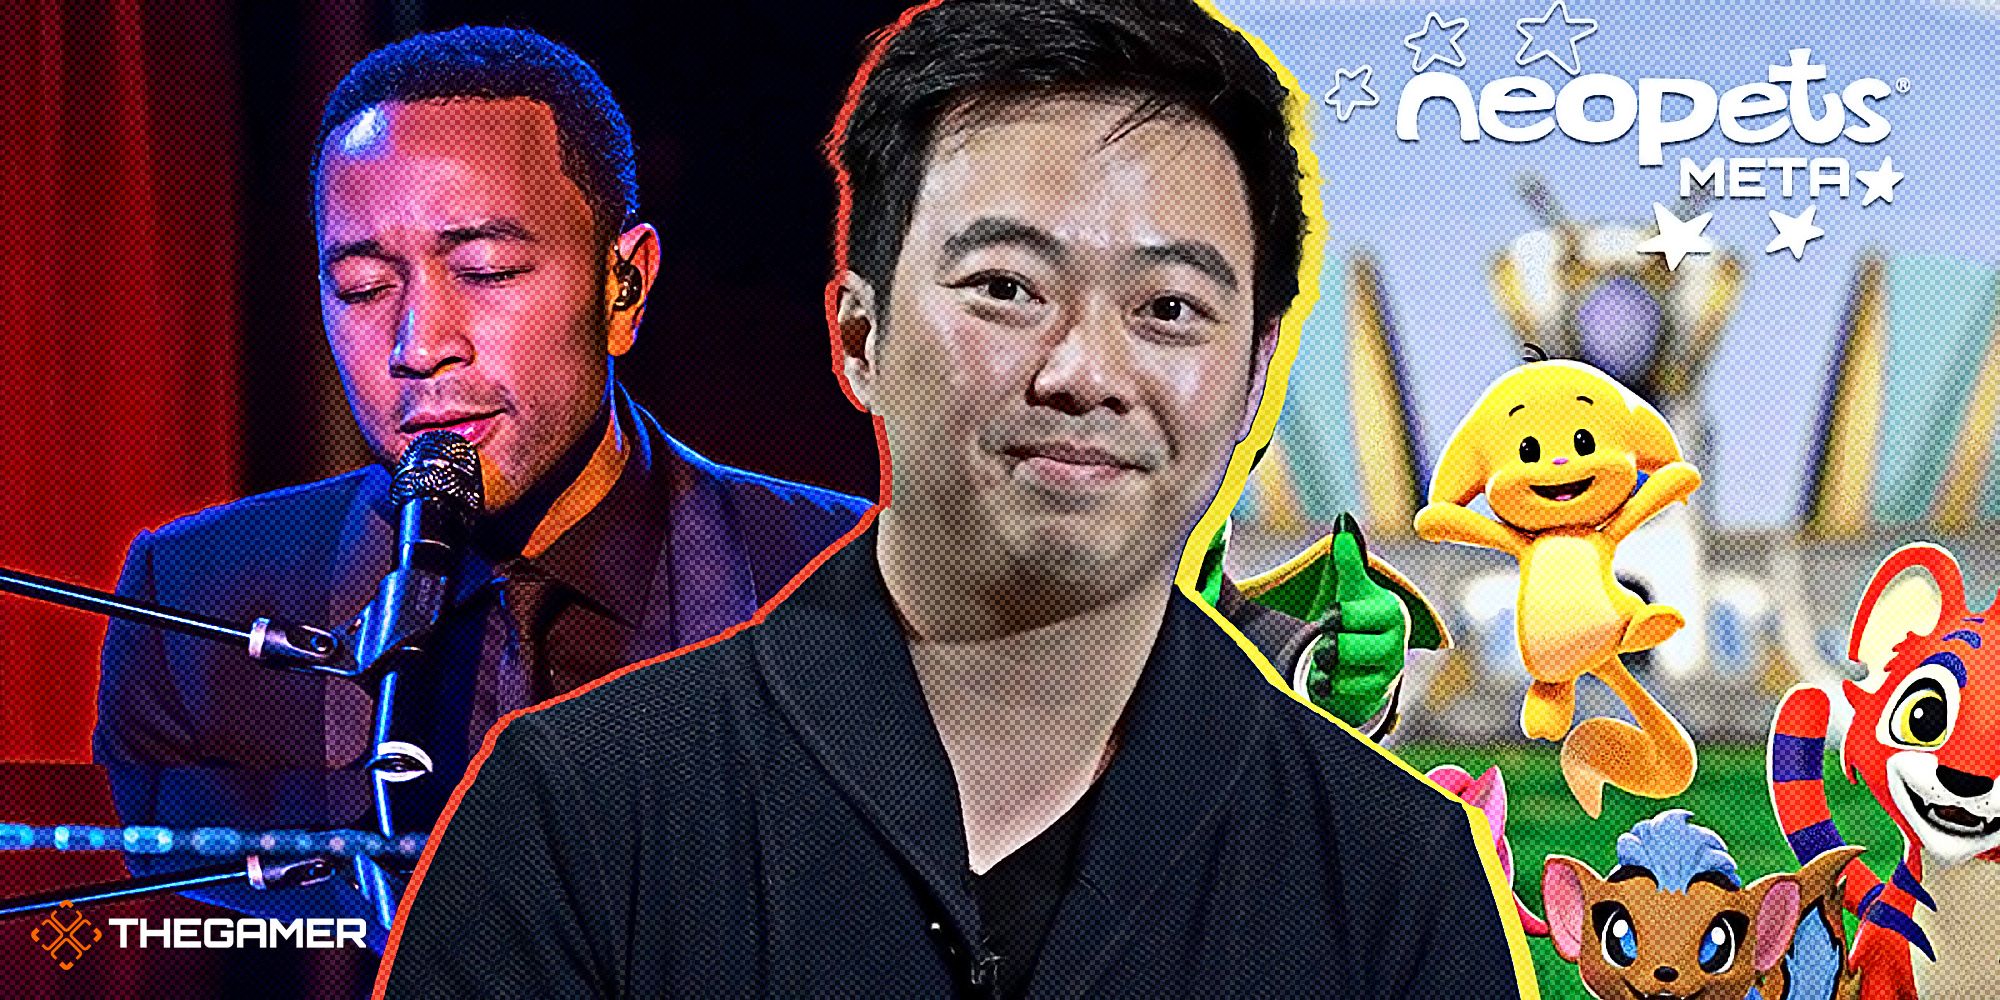 Picture of Neopets CEO Dominic Law superimposed on a picture of John Legend and a screenshot from Neopets Meta